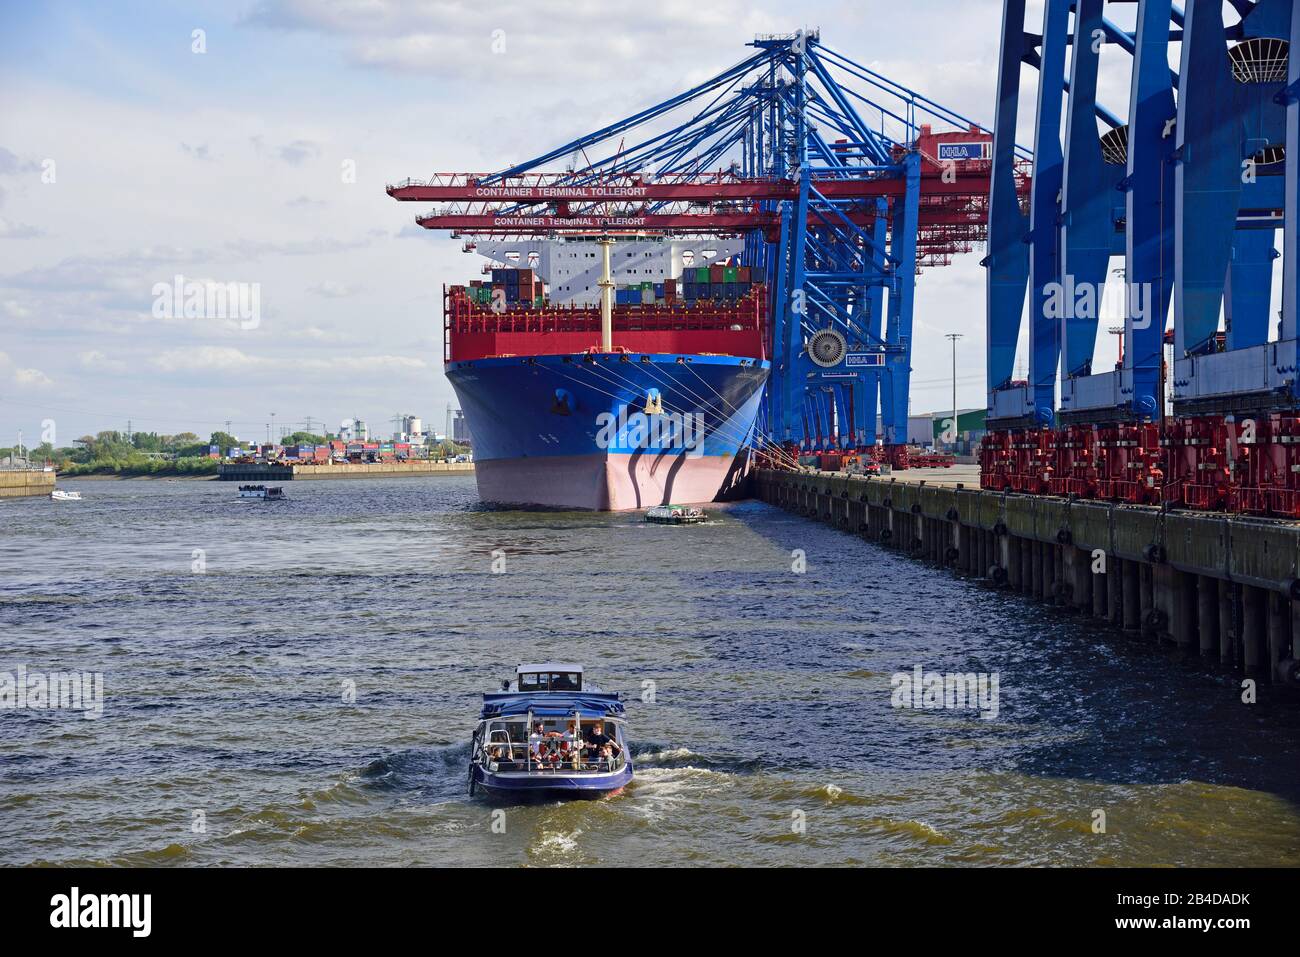 Europe, Germany, Hanseatic City of Hamburg, Elbe, port, container terminal Tollerort, container ship Cosco Shipping Virgo on the quayside, Stock Photo